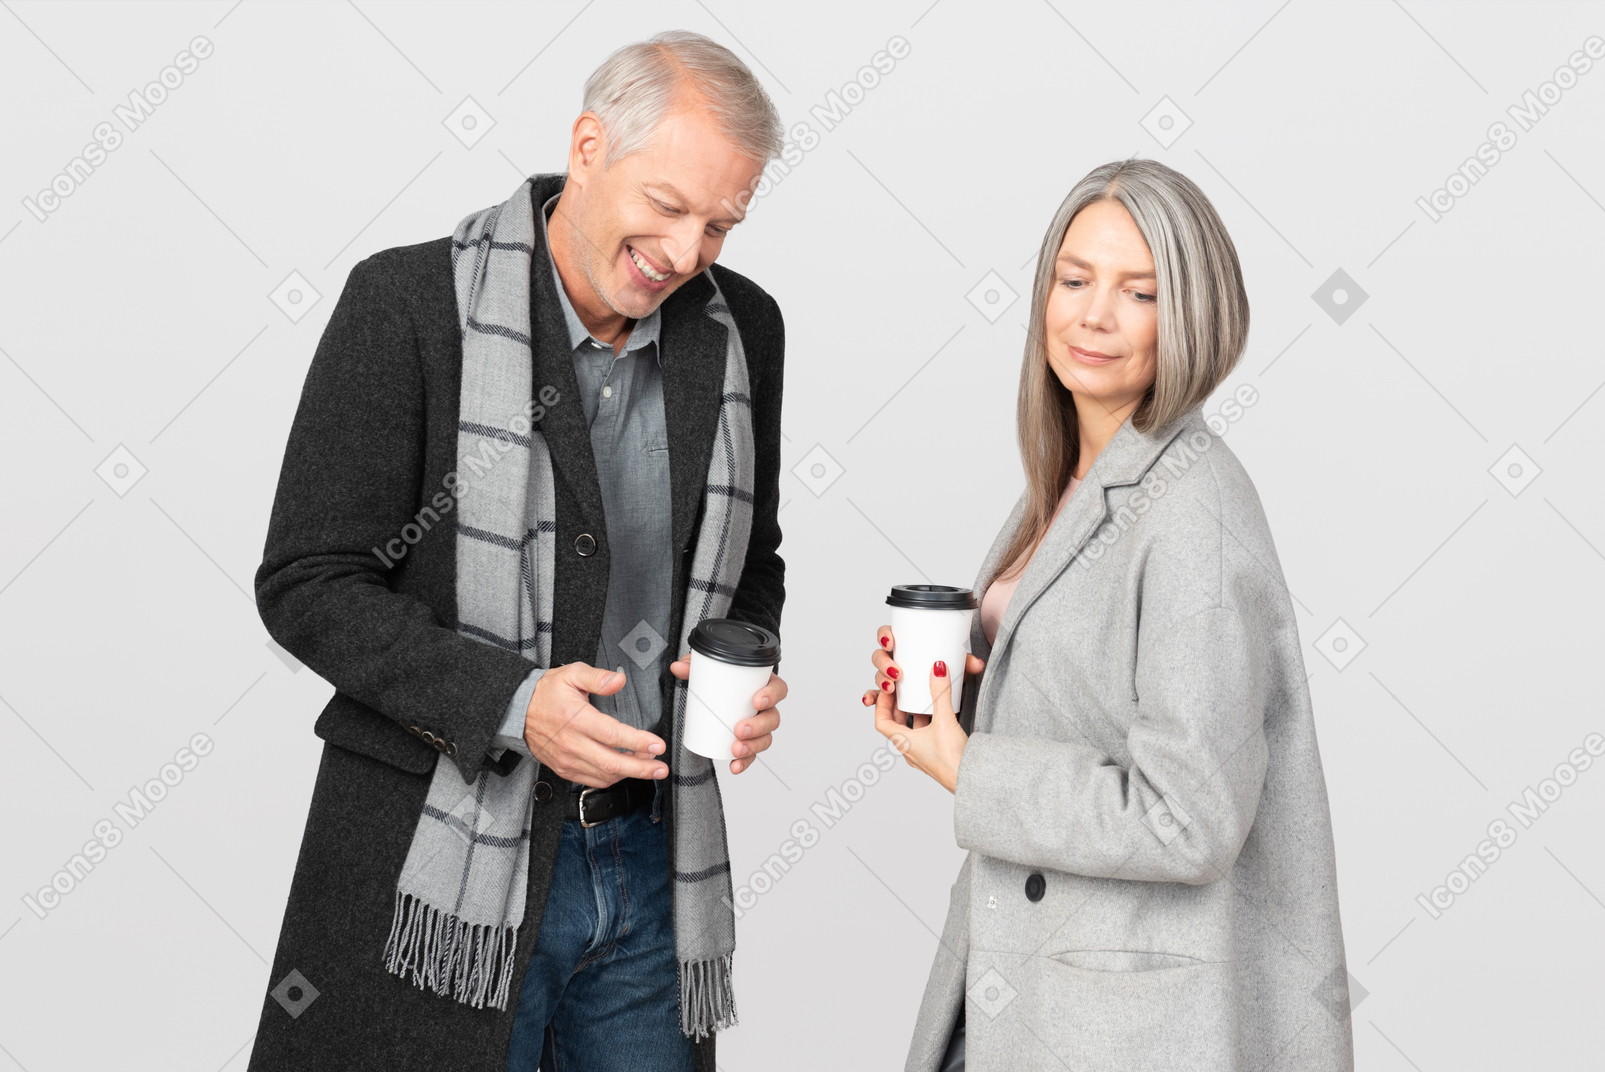 Man joking while having a cup of coffee with his wife